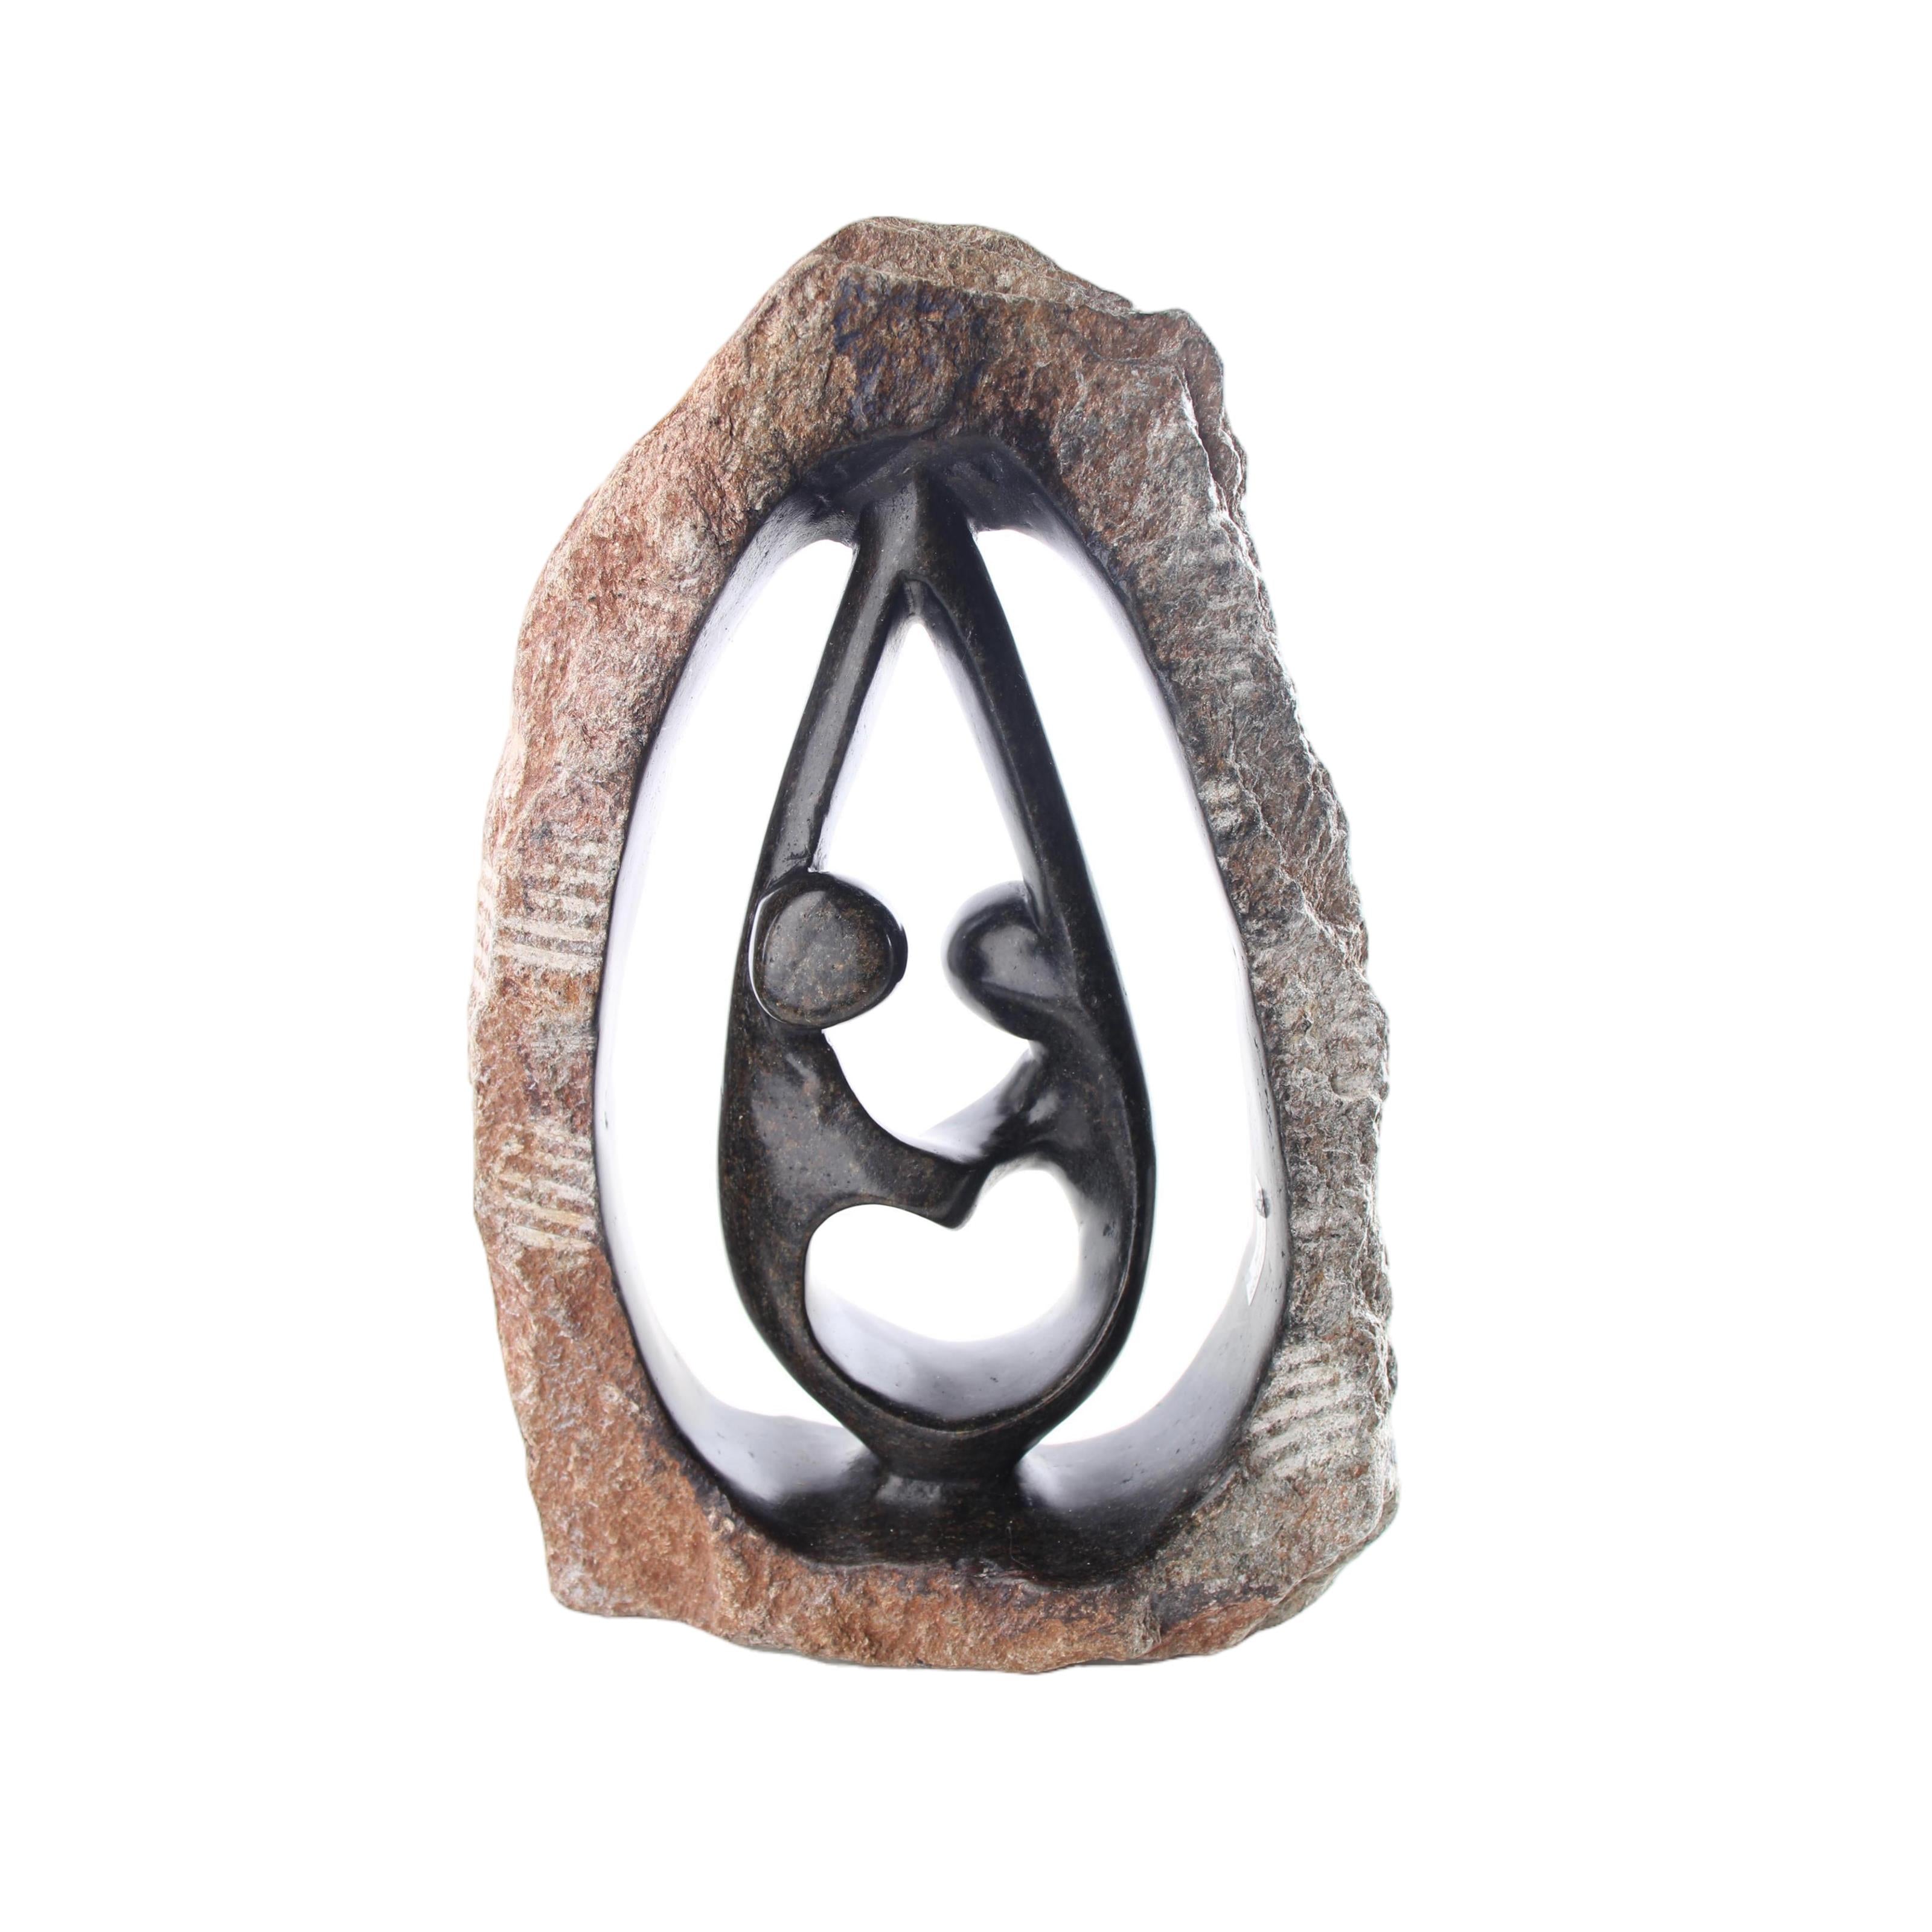 Shona Tribe Serpentine Stone Couples ~10.2" Tall - Couples